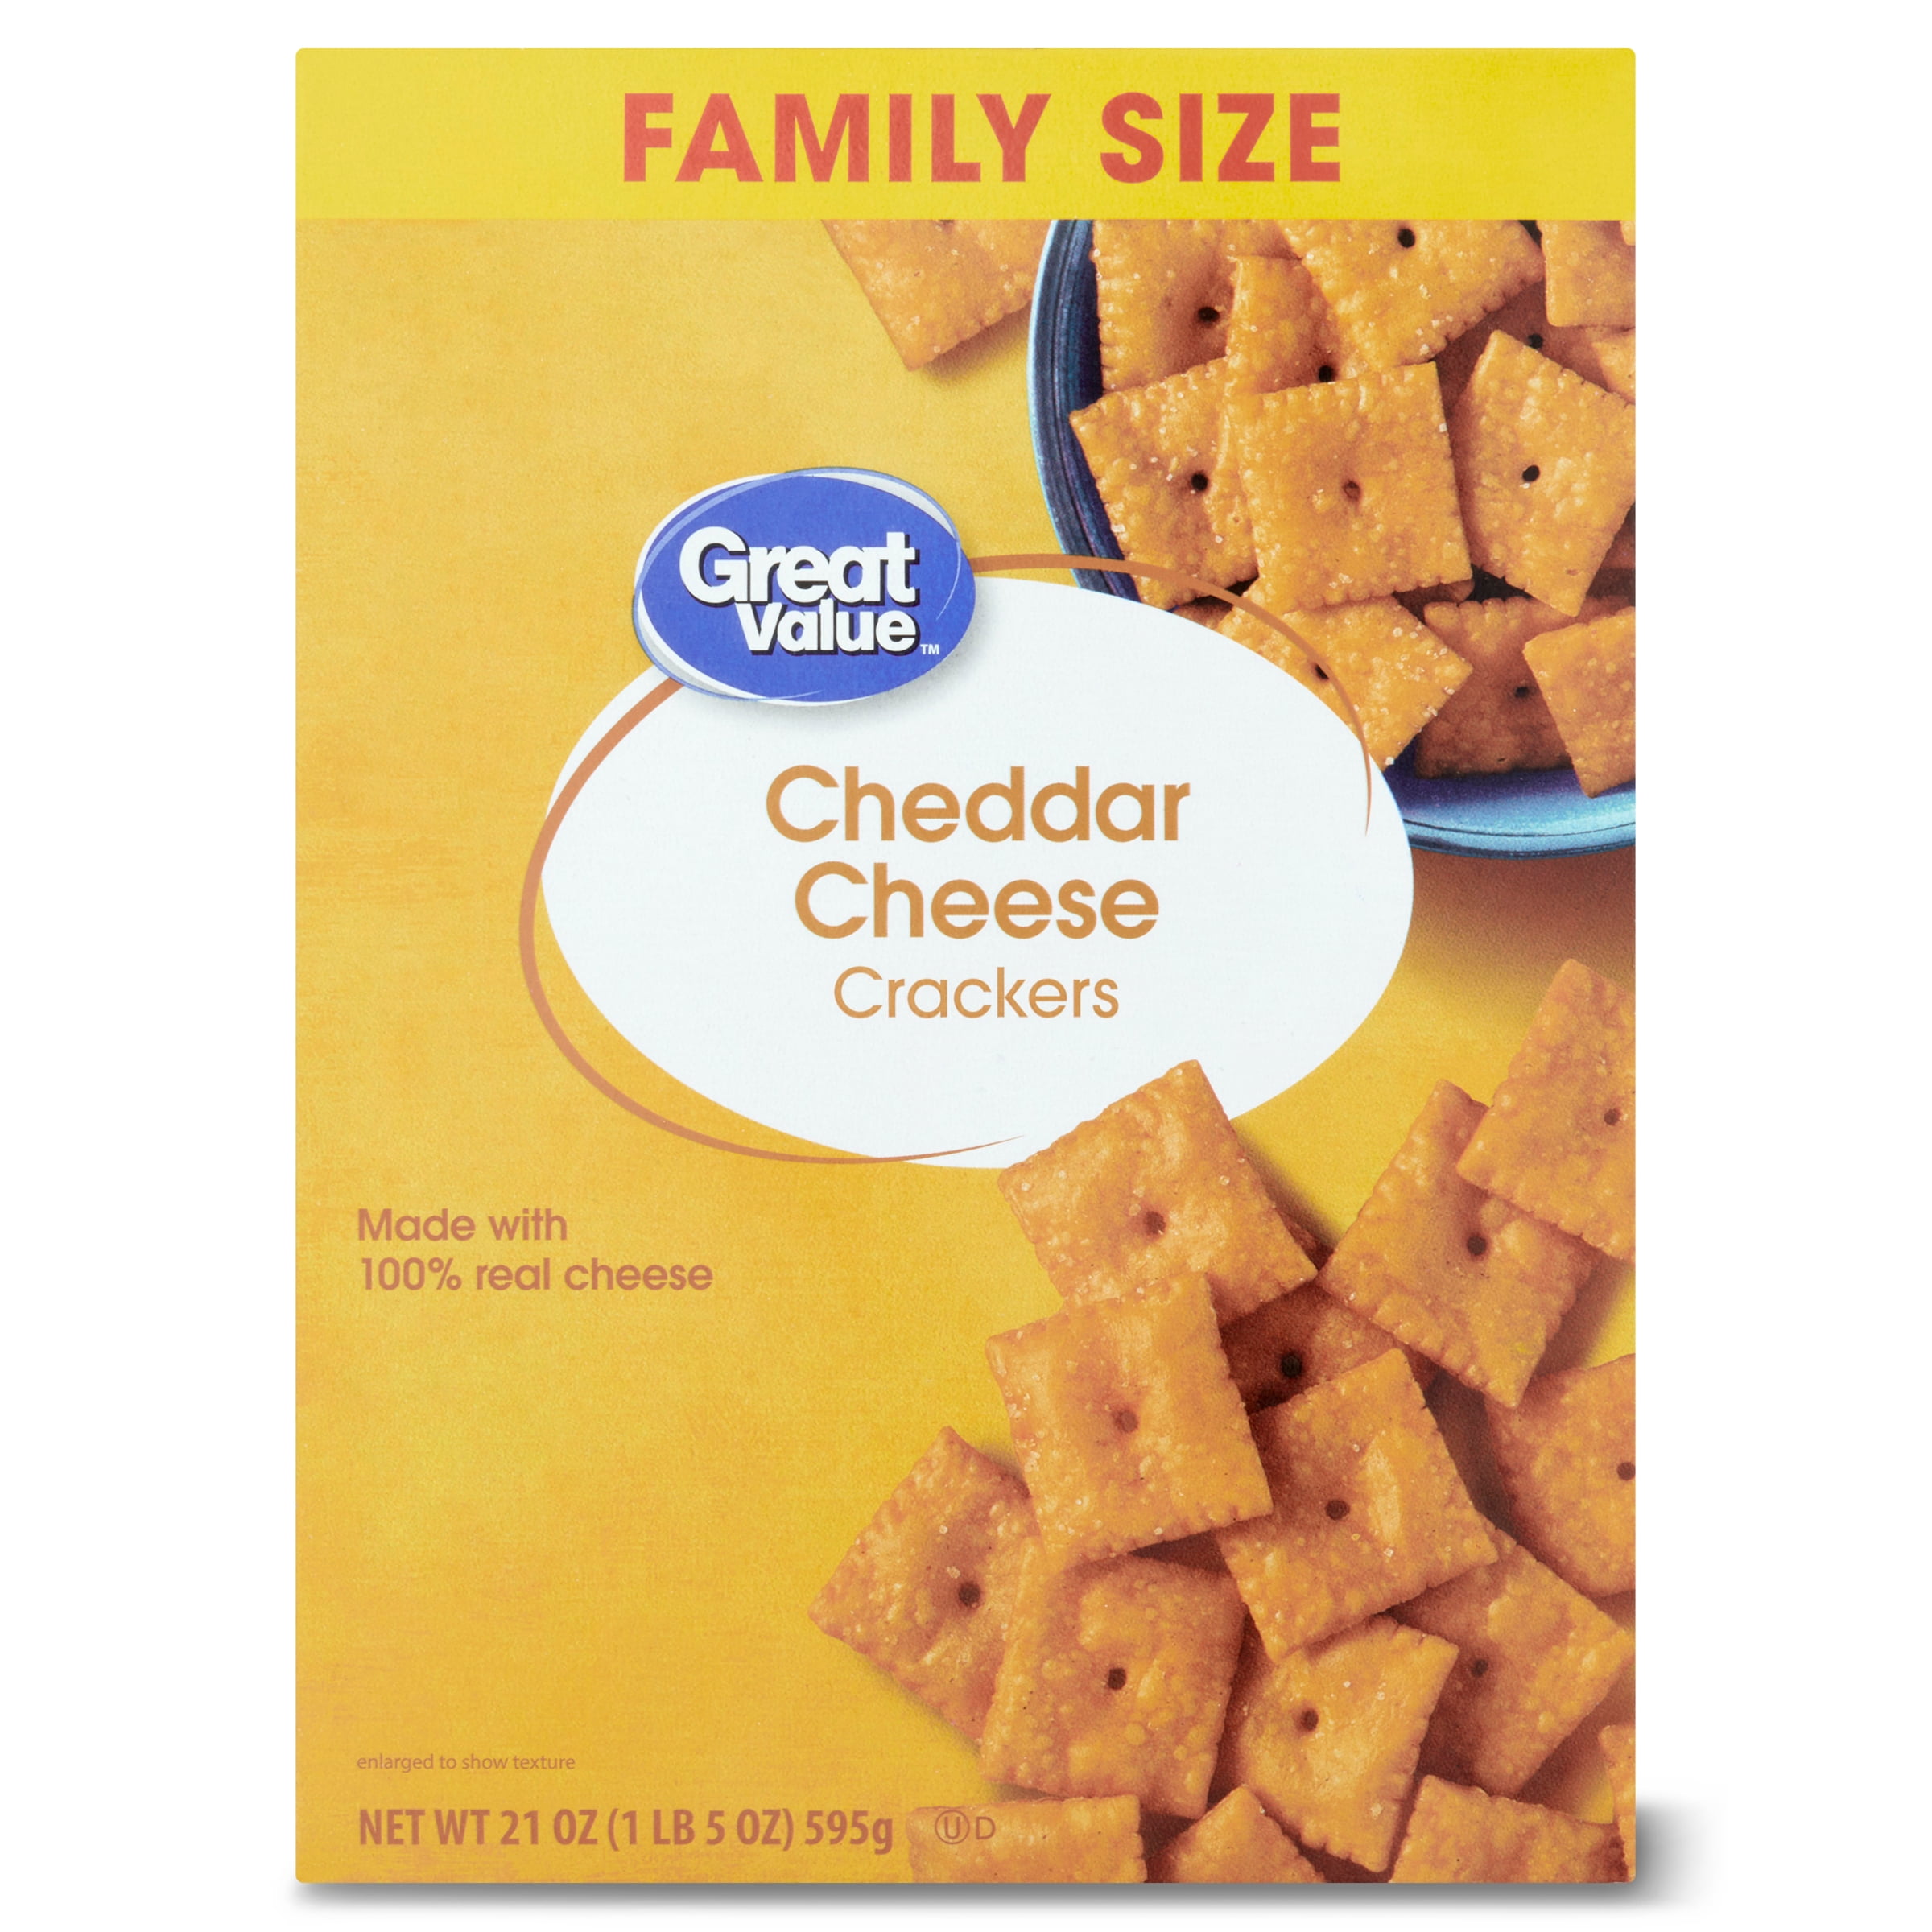 Great Value Family Size Cheddar Cheese Crackers, Family Size, 21 oz